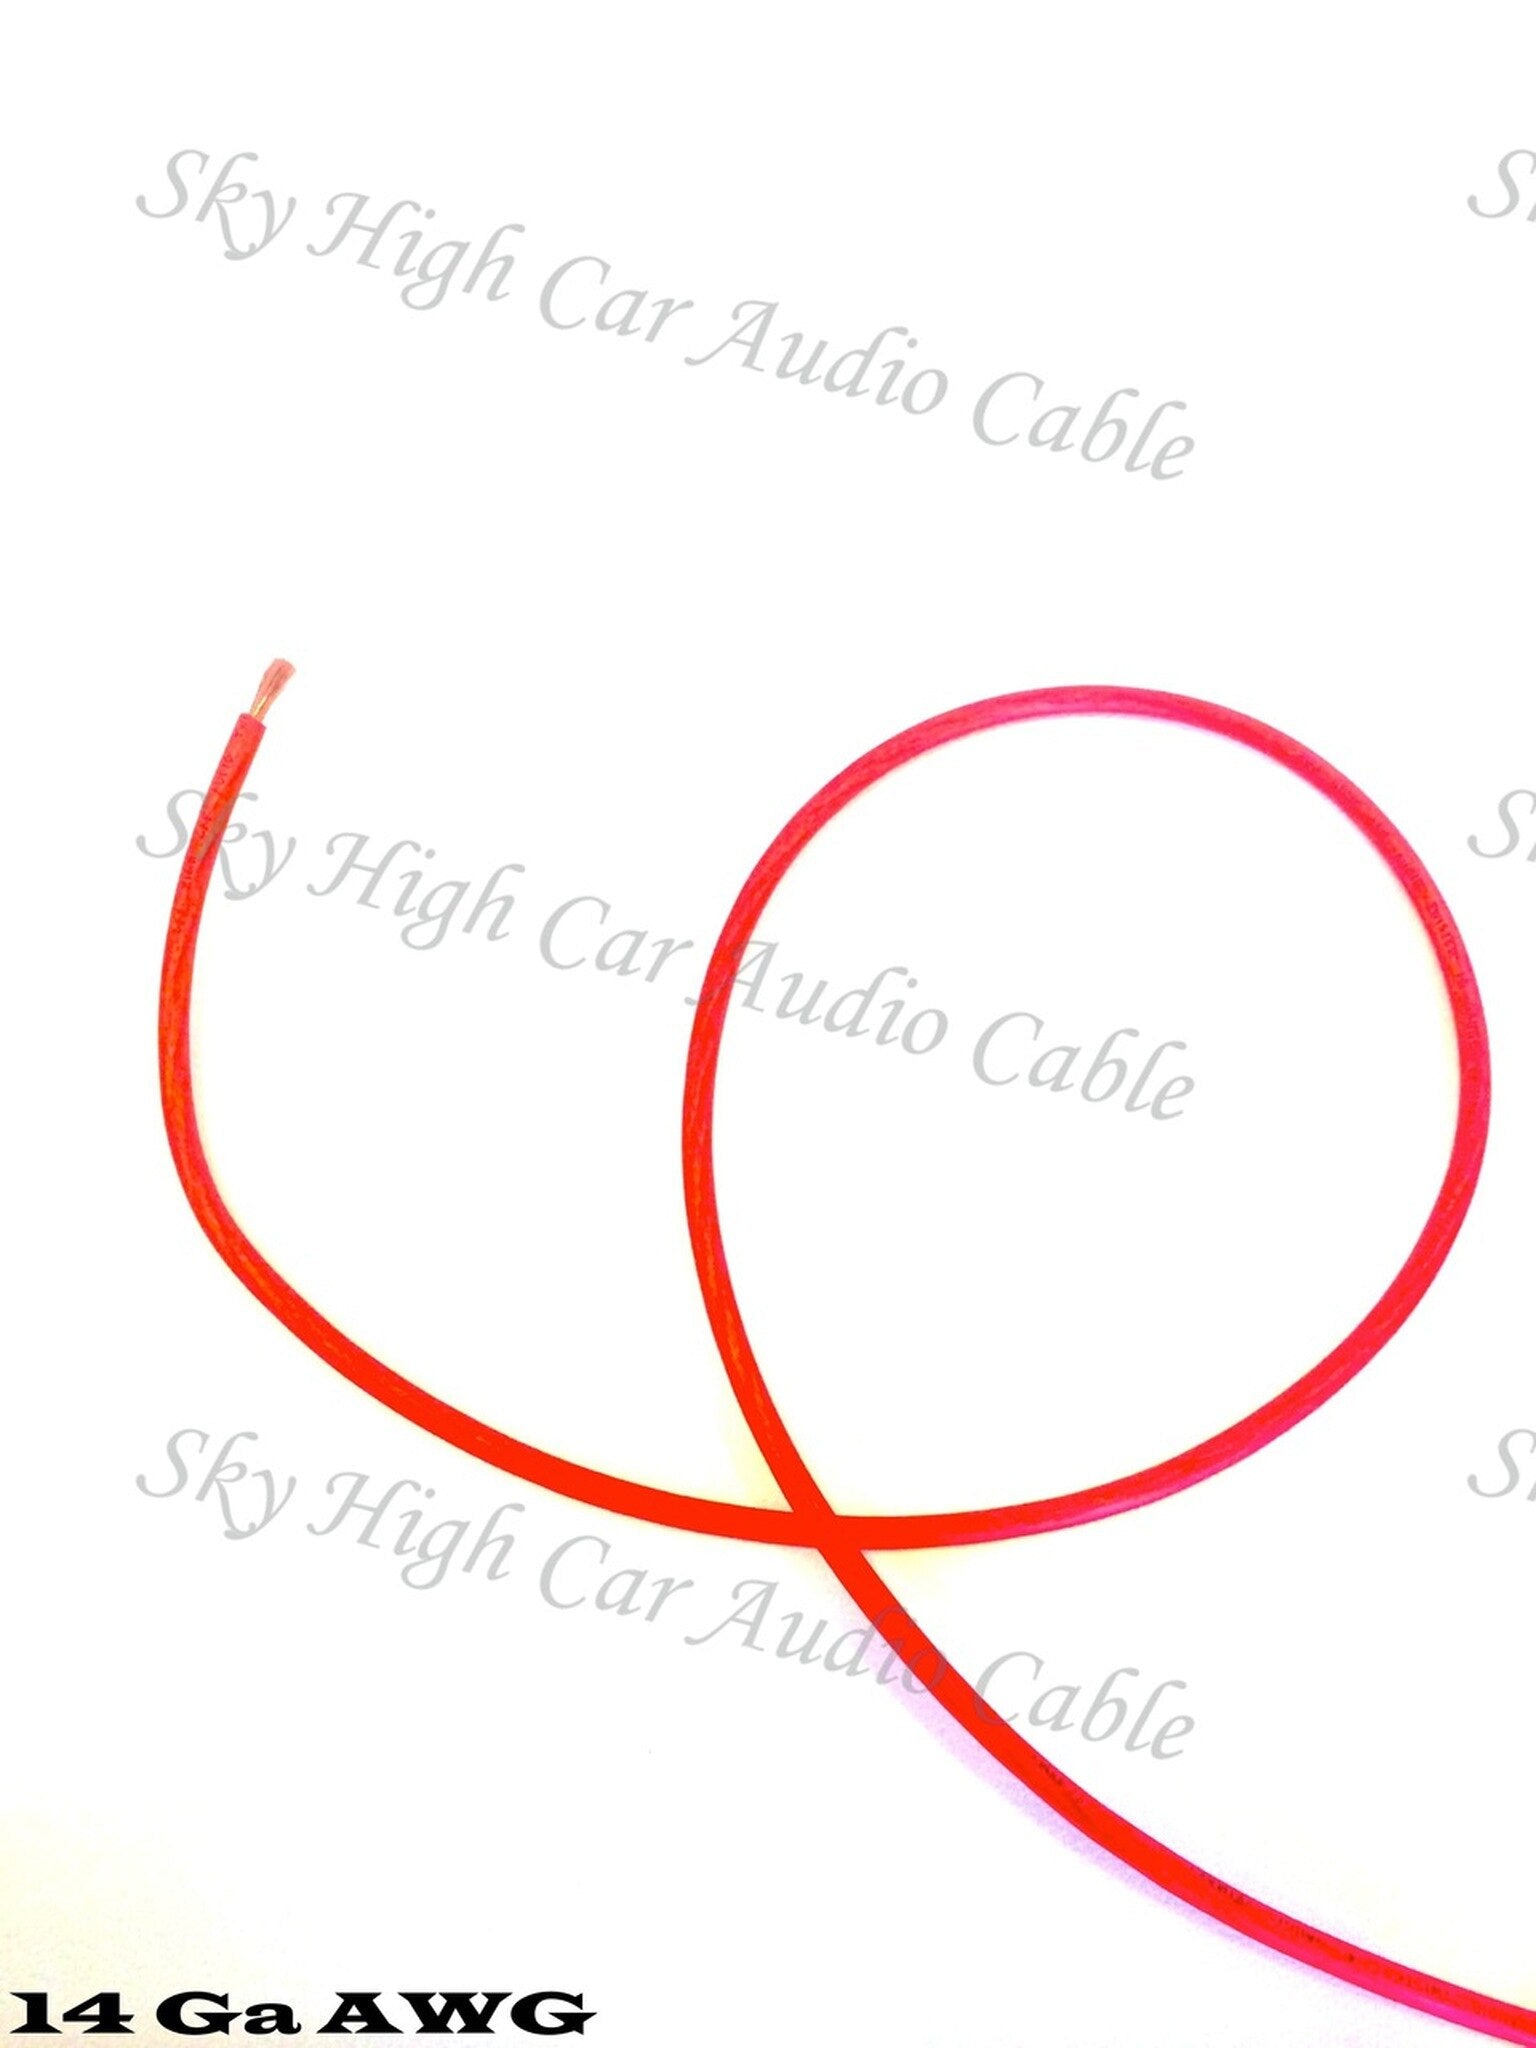 Sky High Car Audio OFC 14 Gauge Primary Wire 25ft-500ft